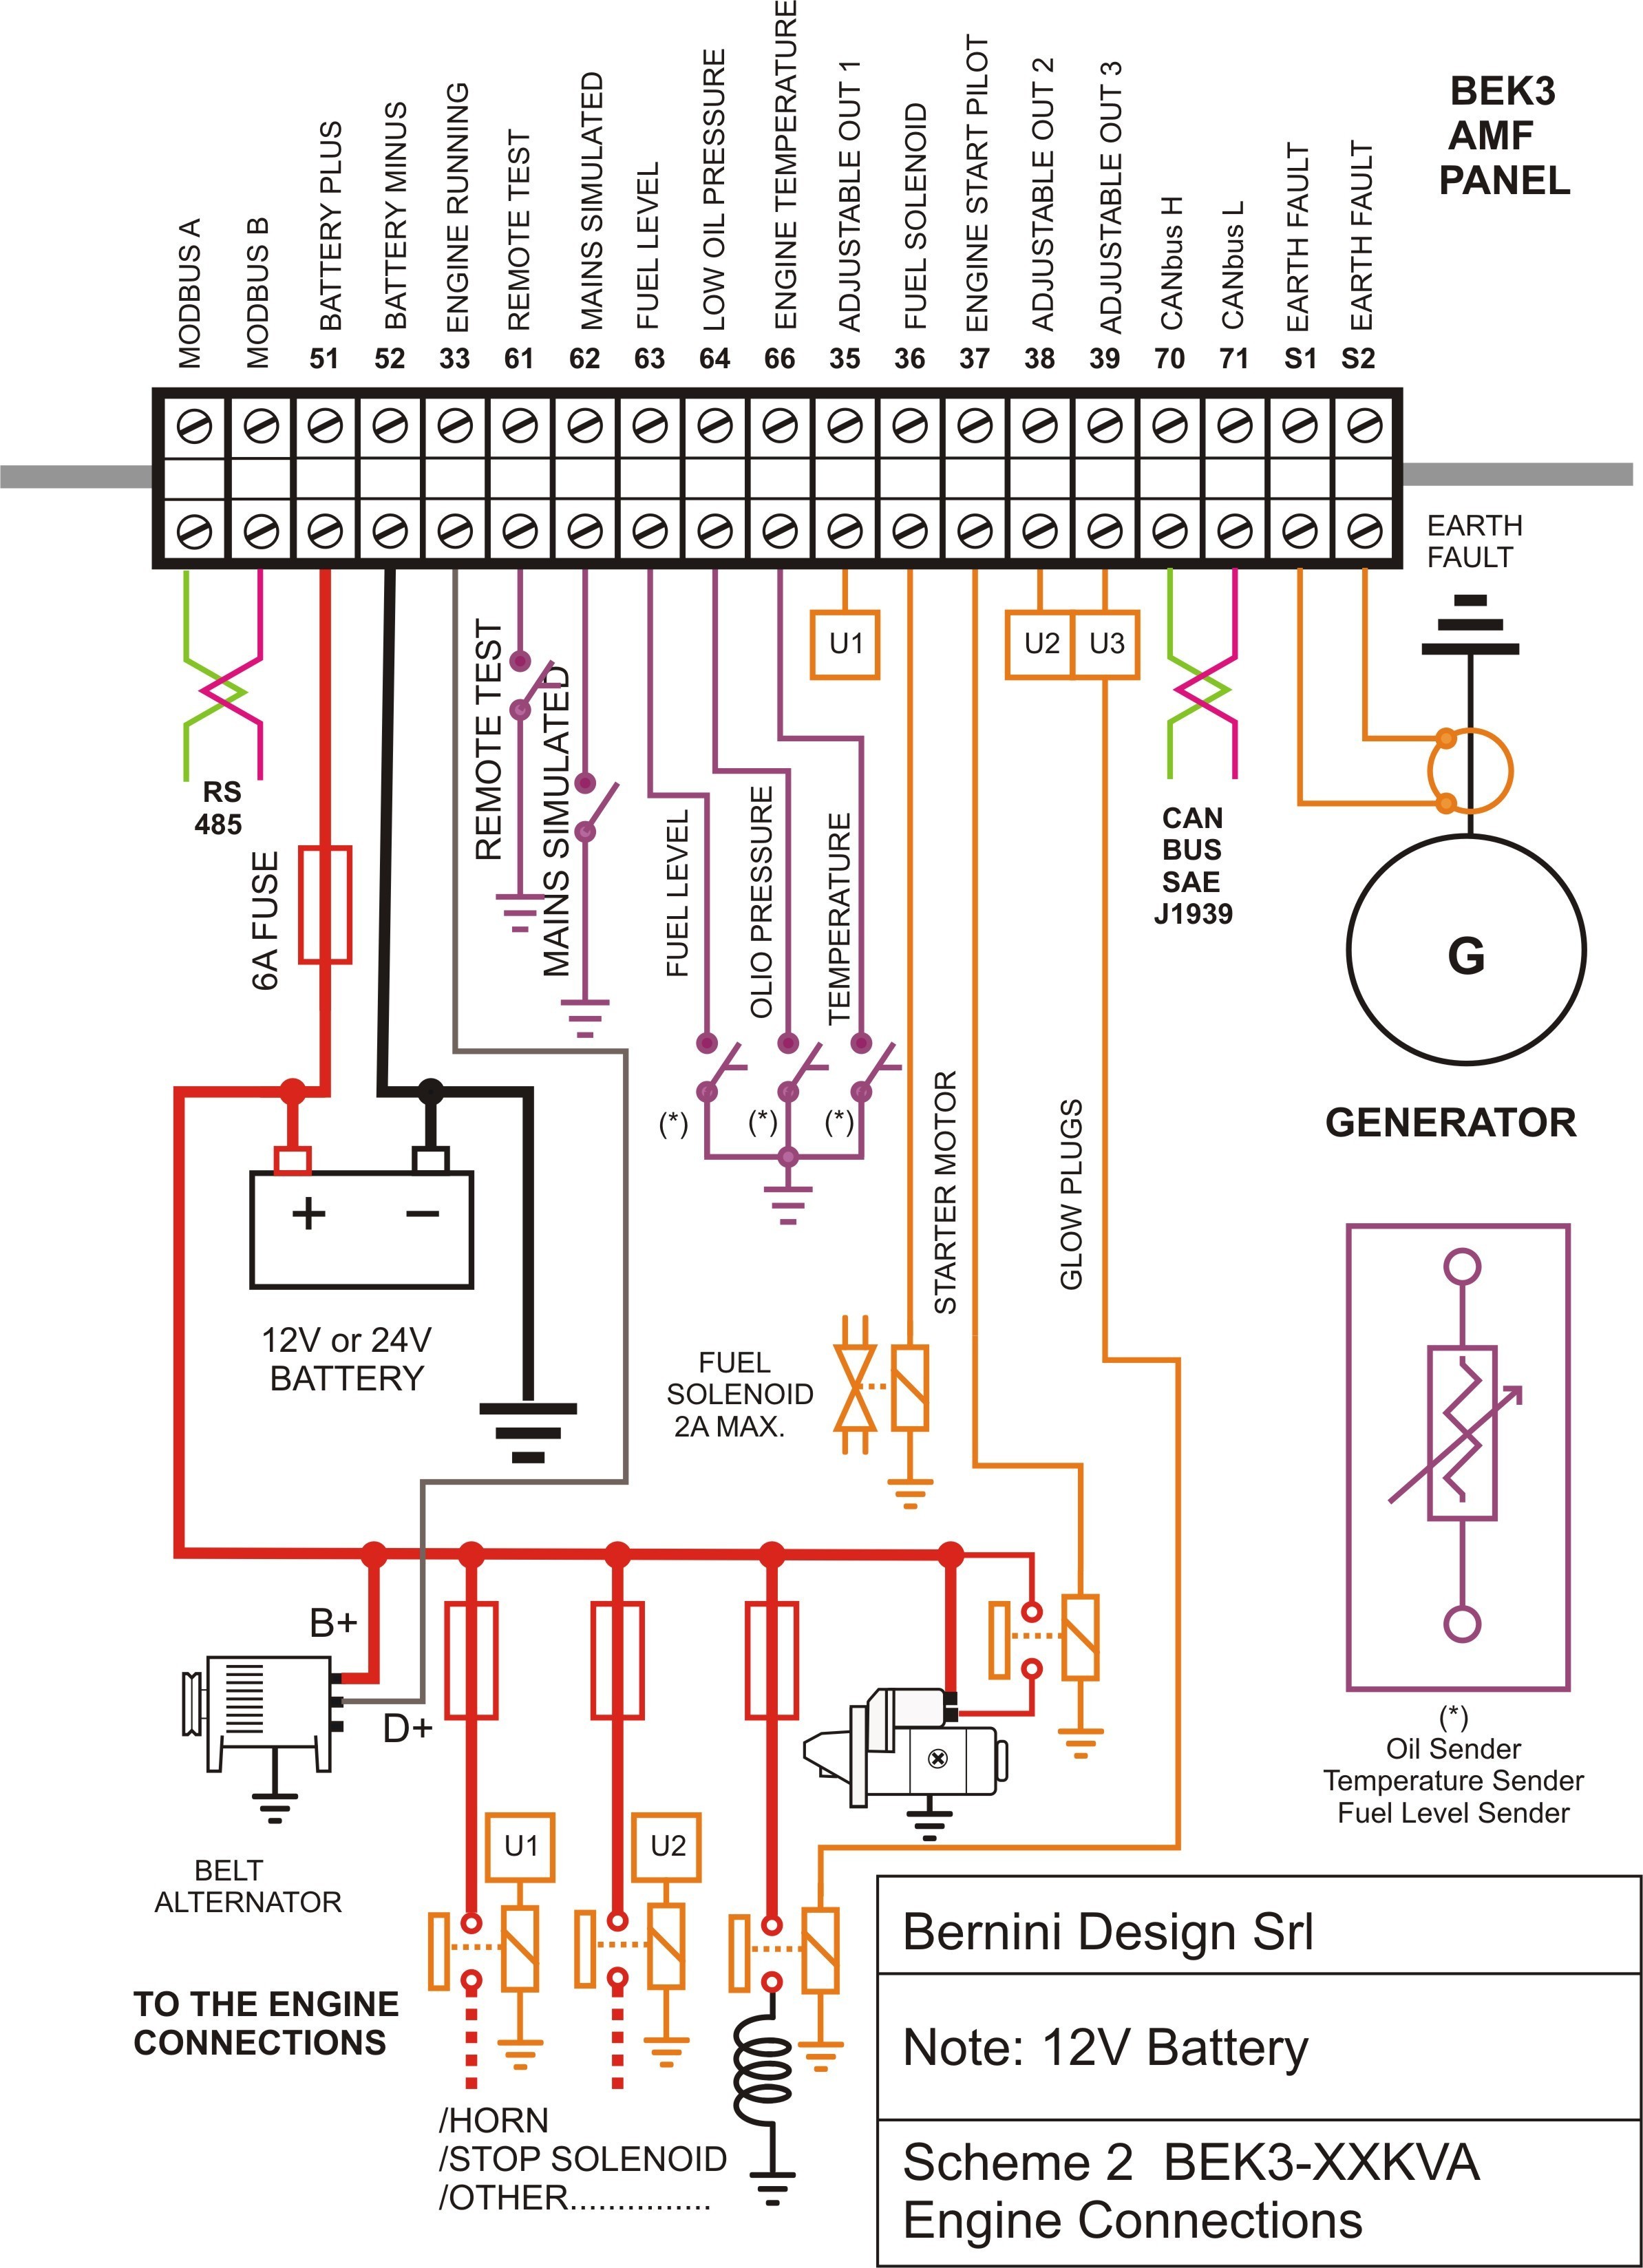 Home Generator Wiring Diagram Wiring Diagram Residential Diagrams and Schematics Home Inside Of Home Generator Wiring Diagram